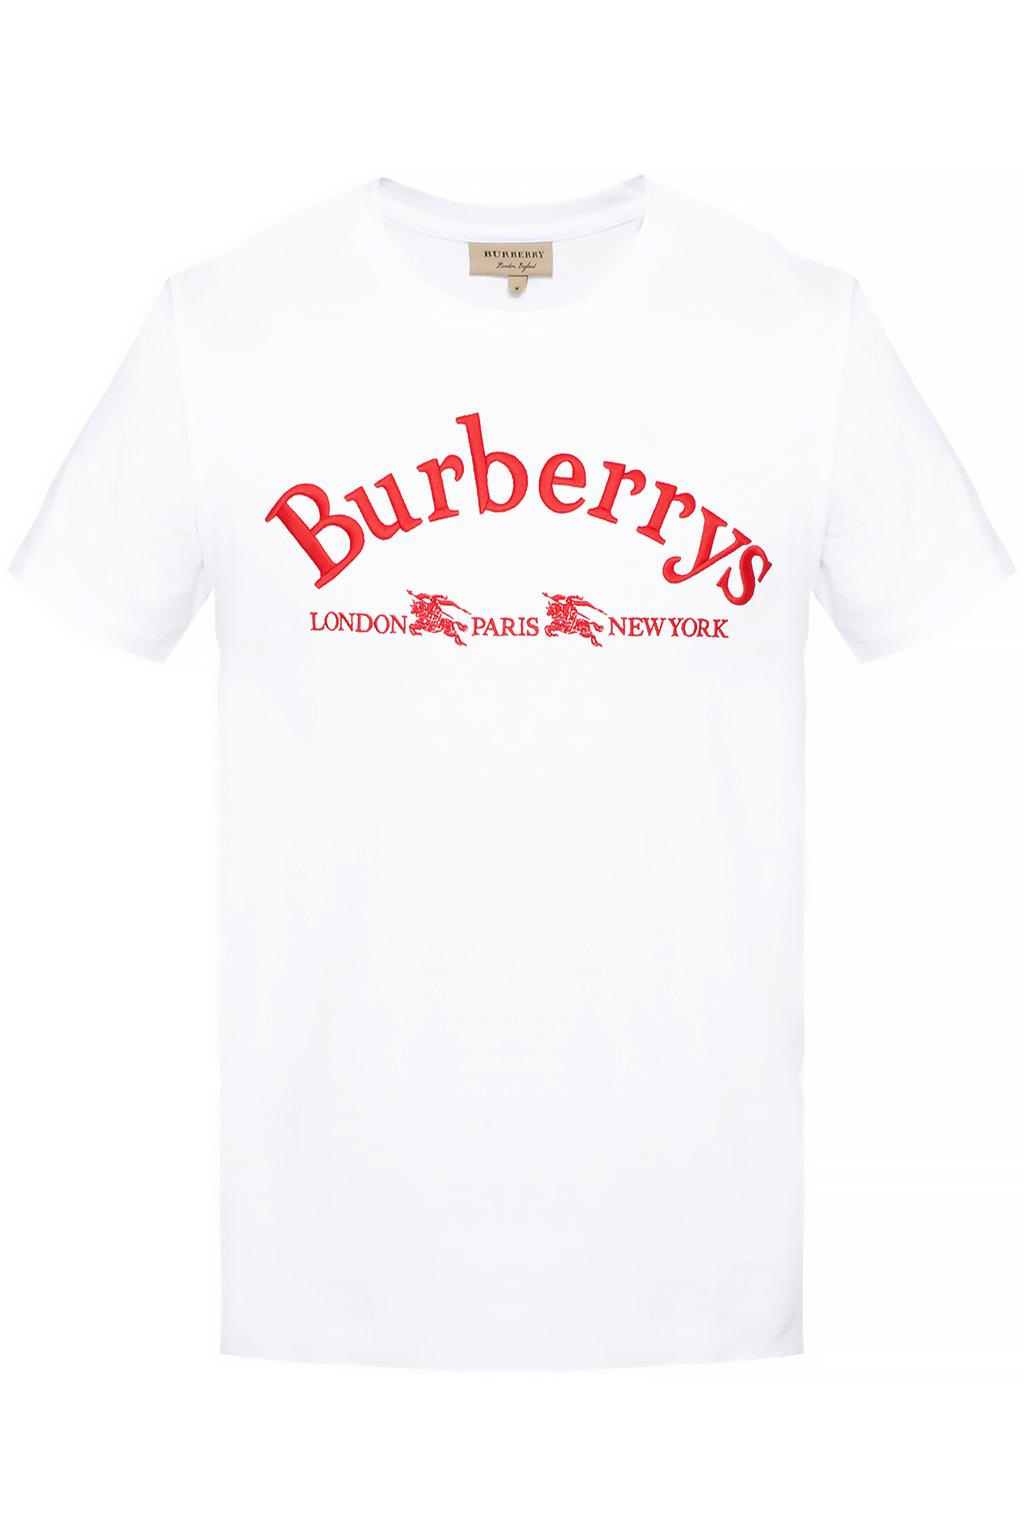 burberry white and red t shirt